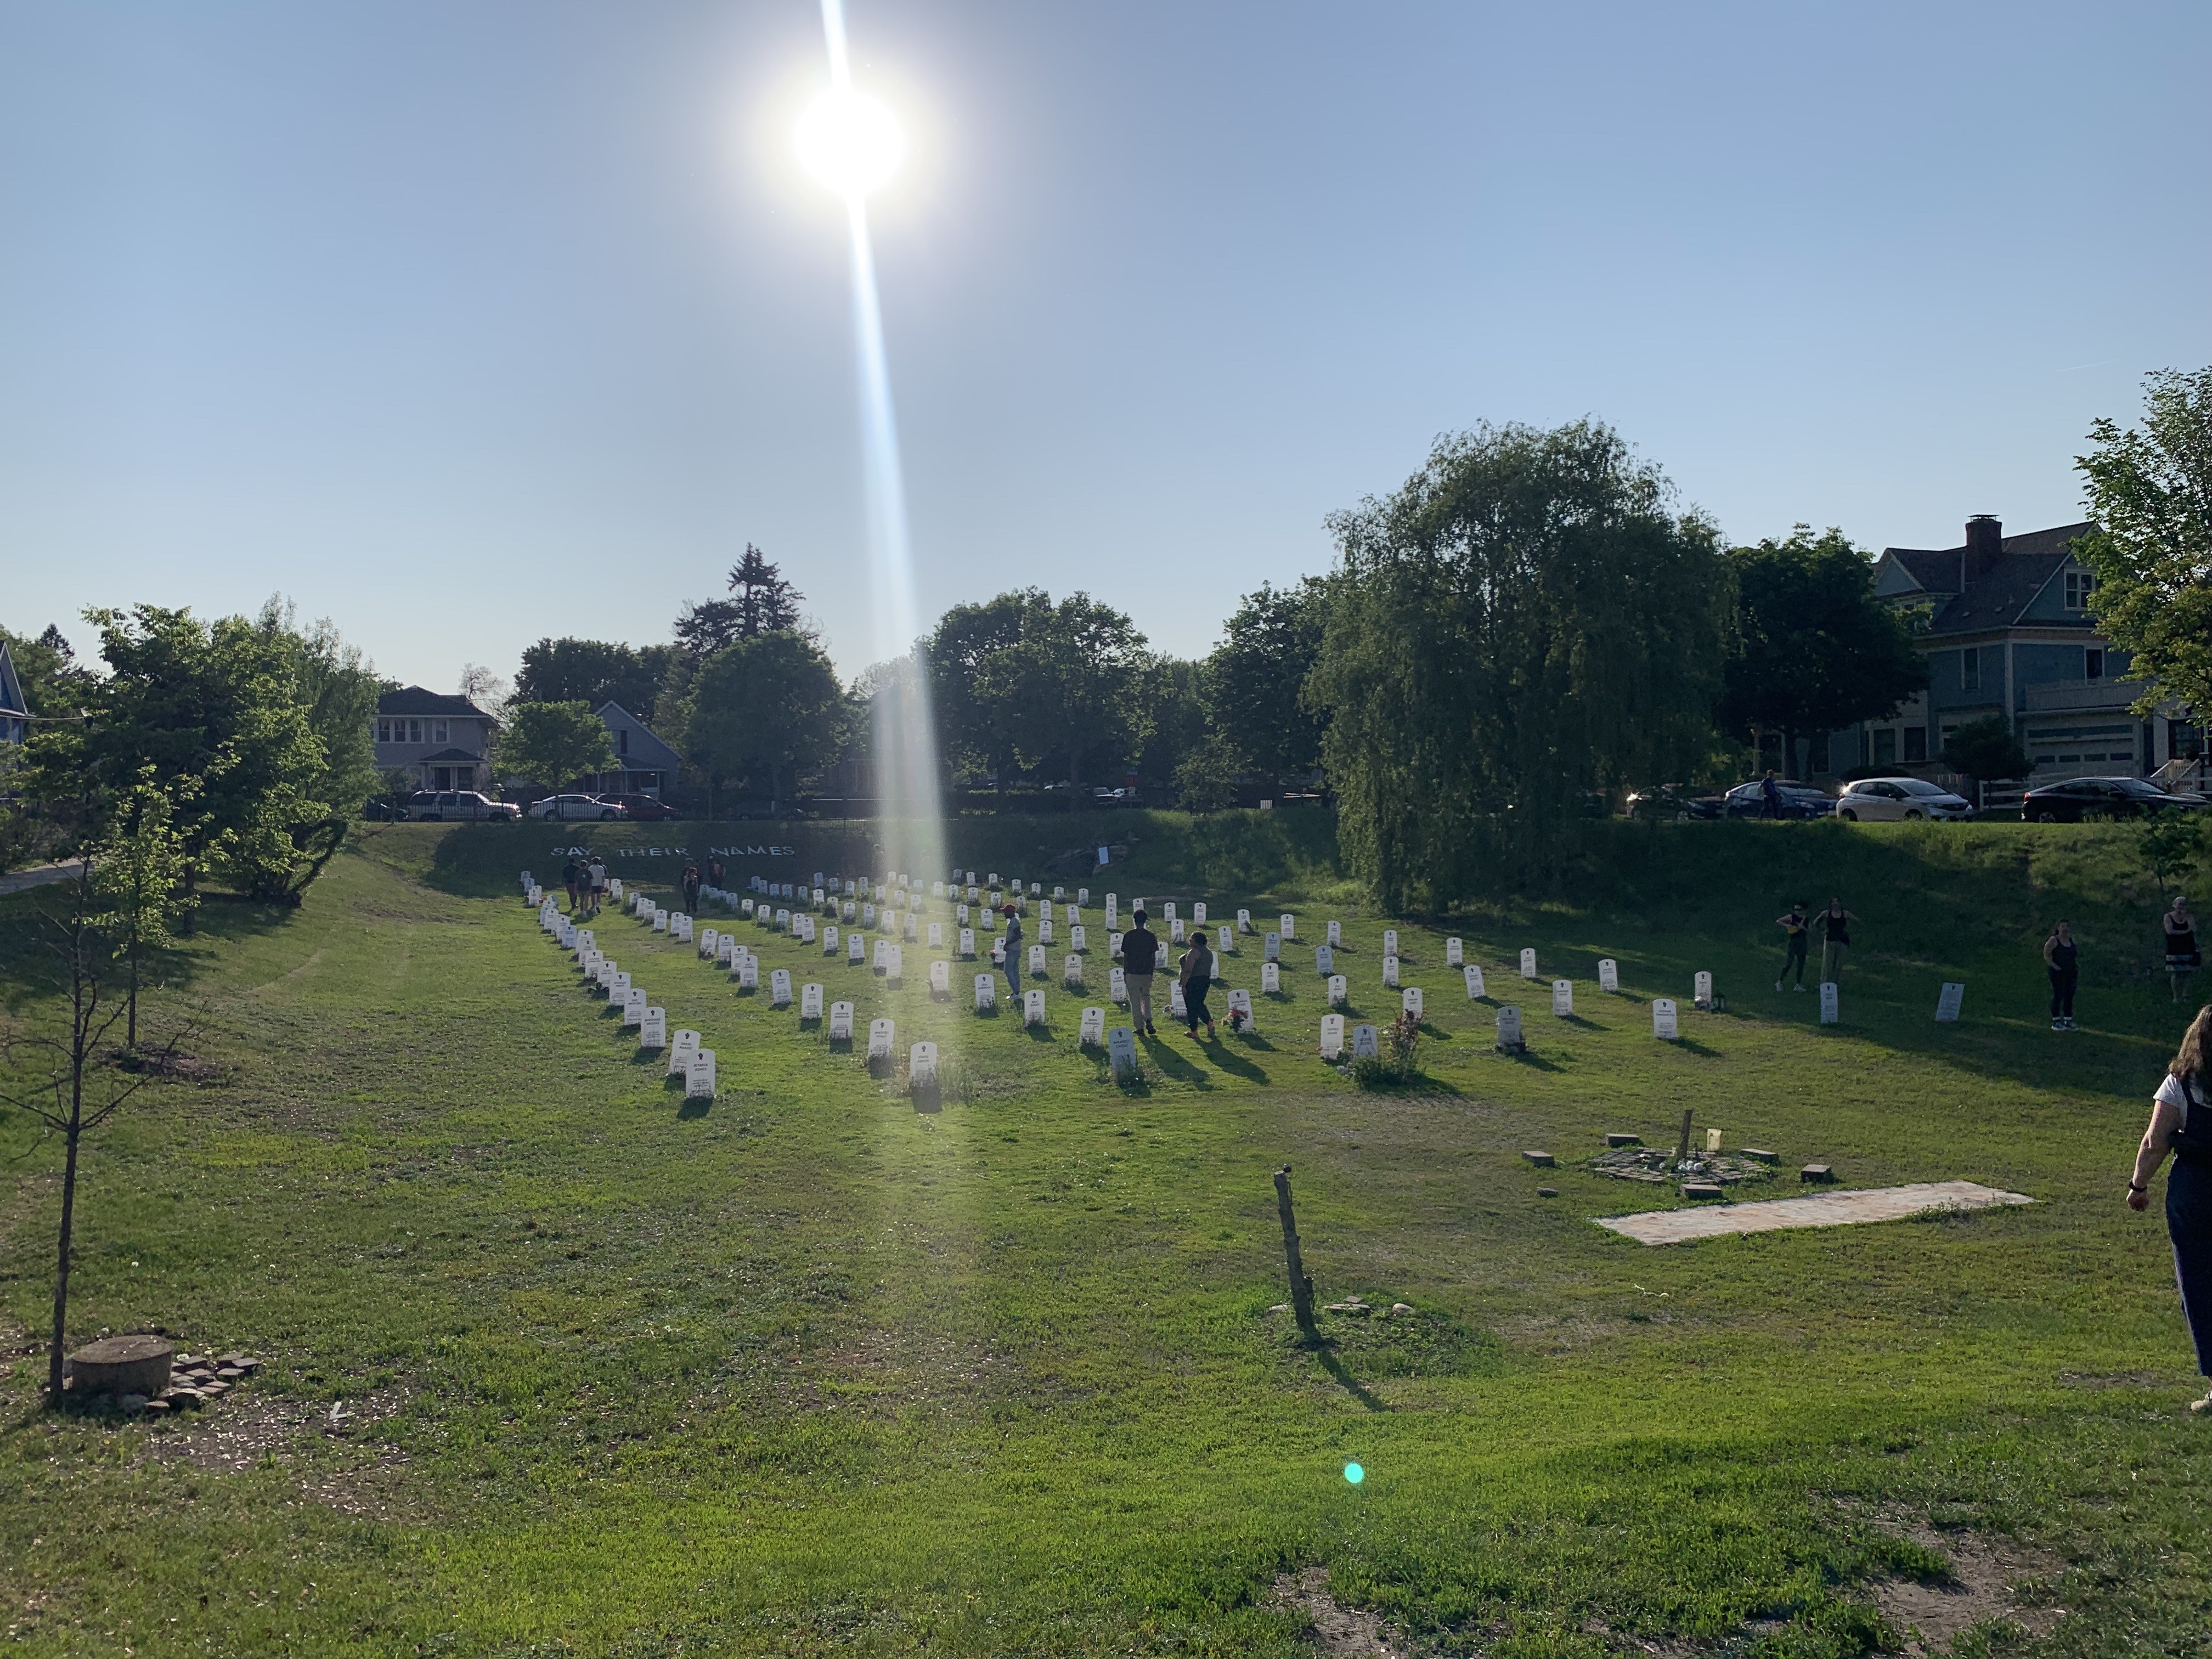 Image of a field filled with white headstones.